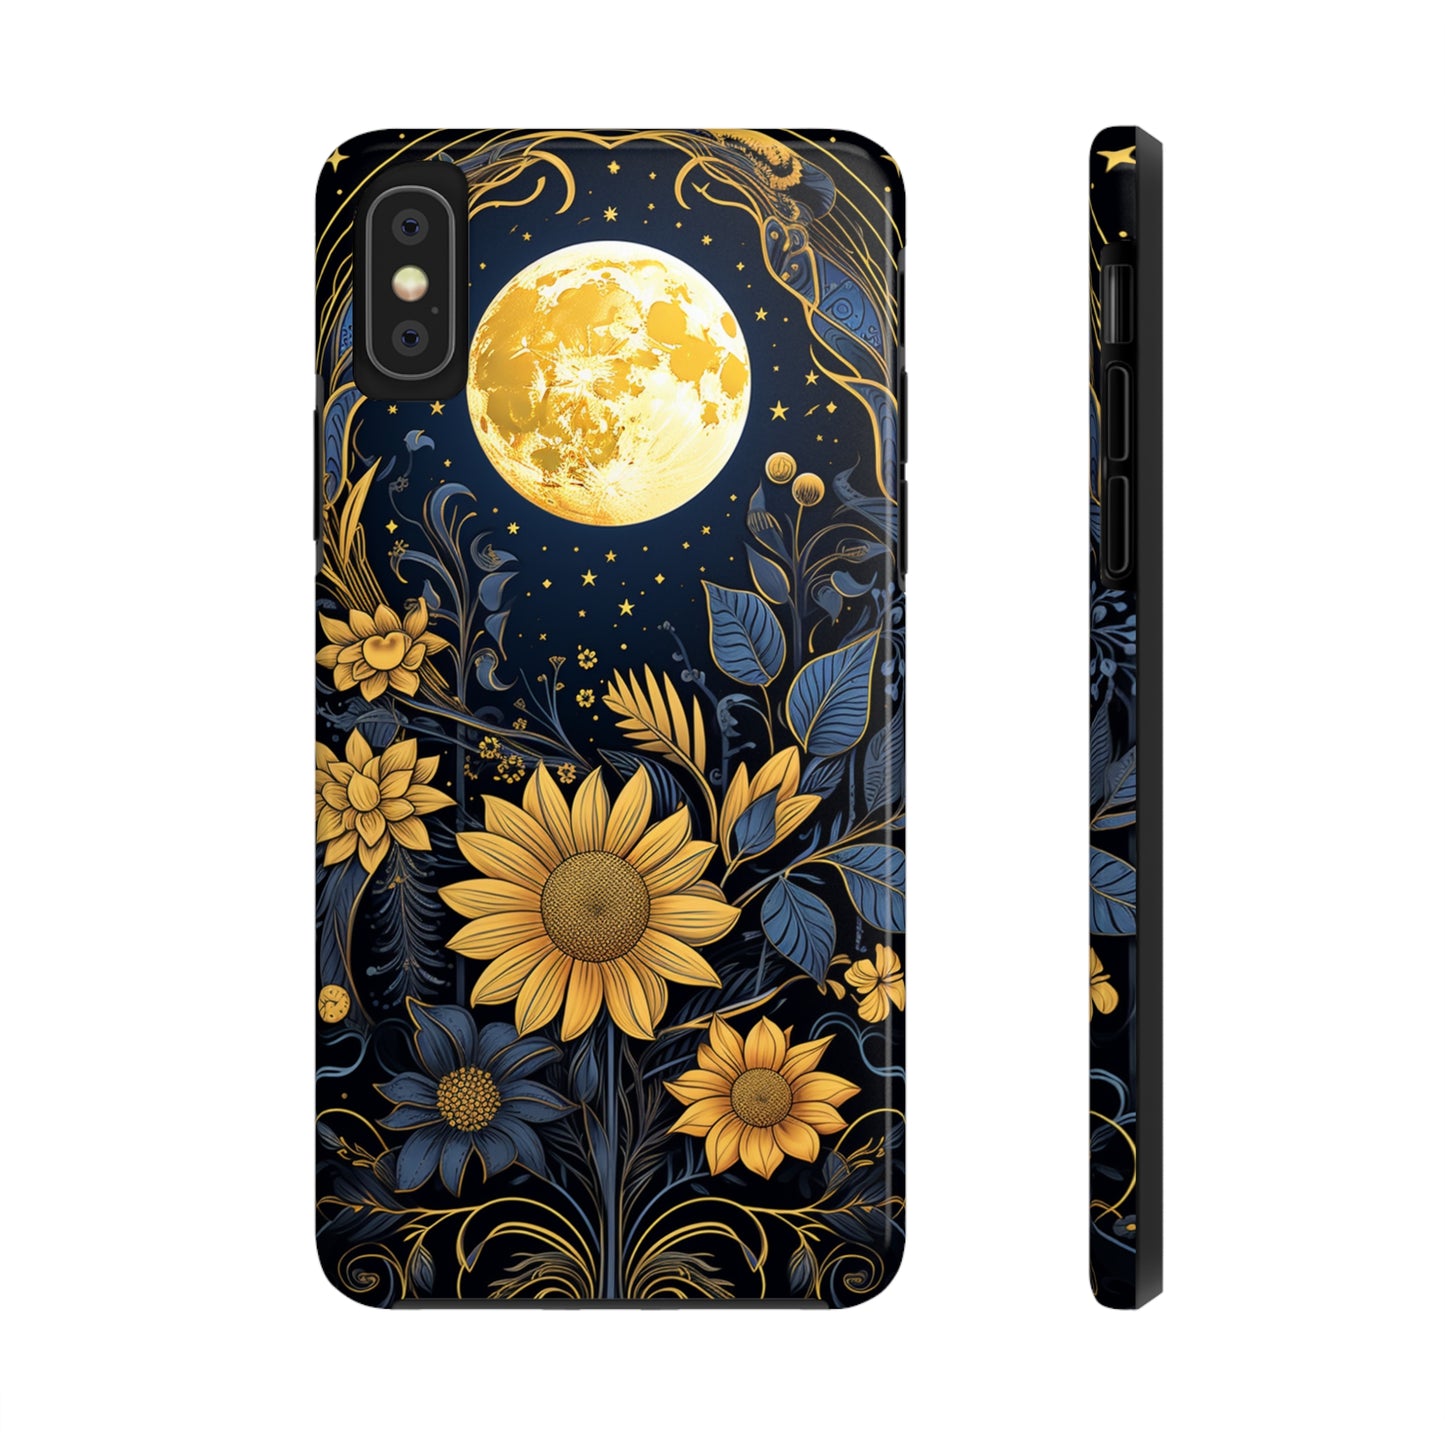 Protective iPhone 11 and 14 case with eclectic aesthetics